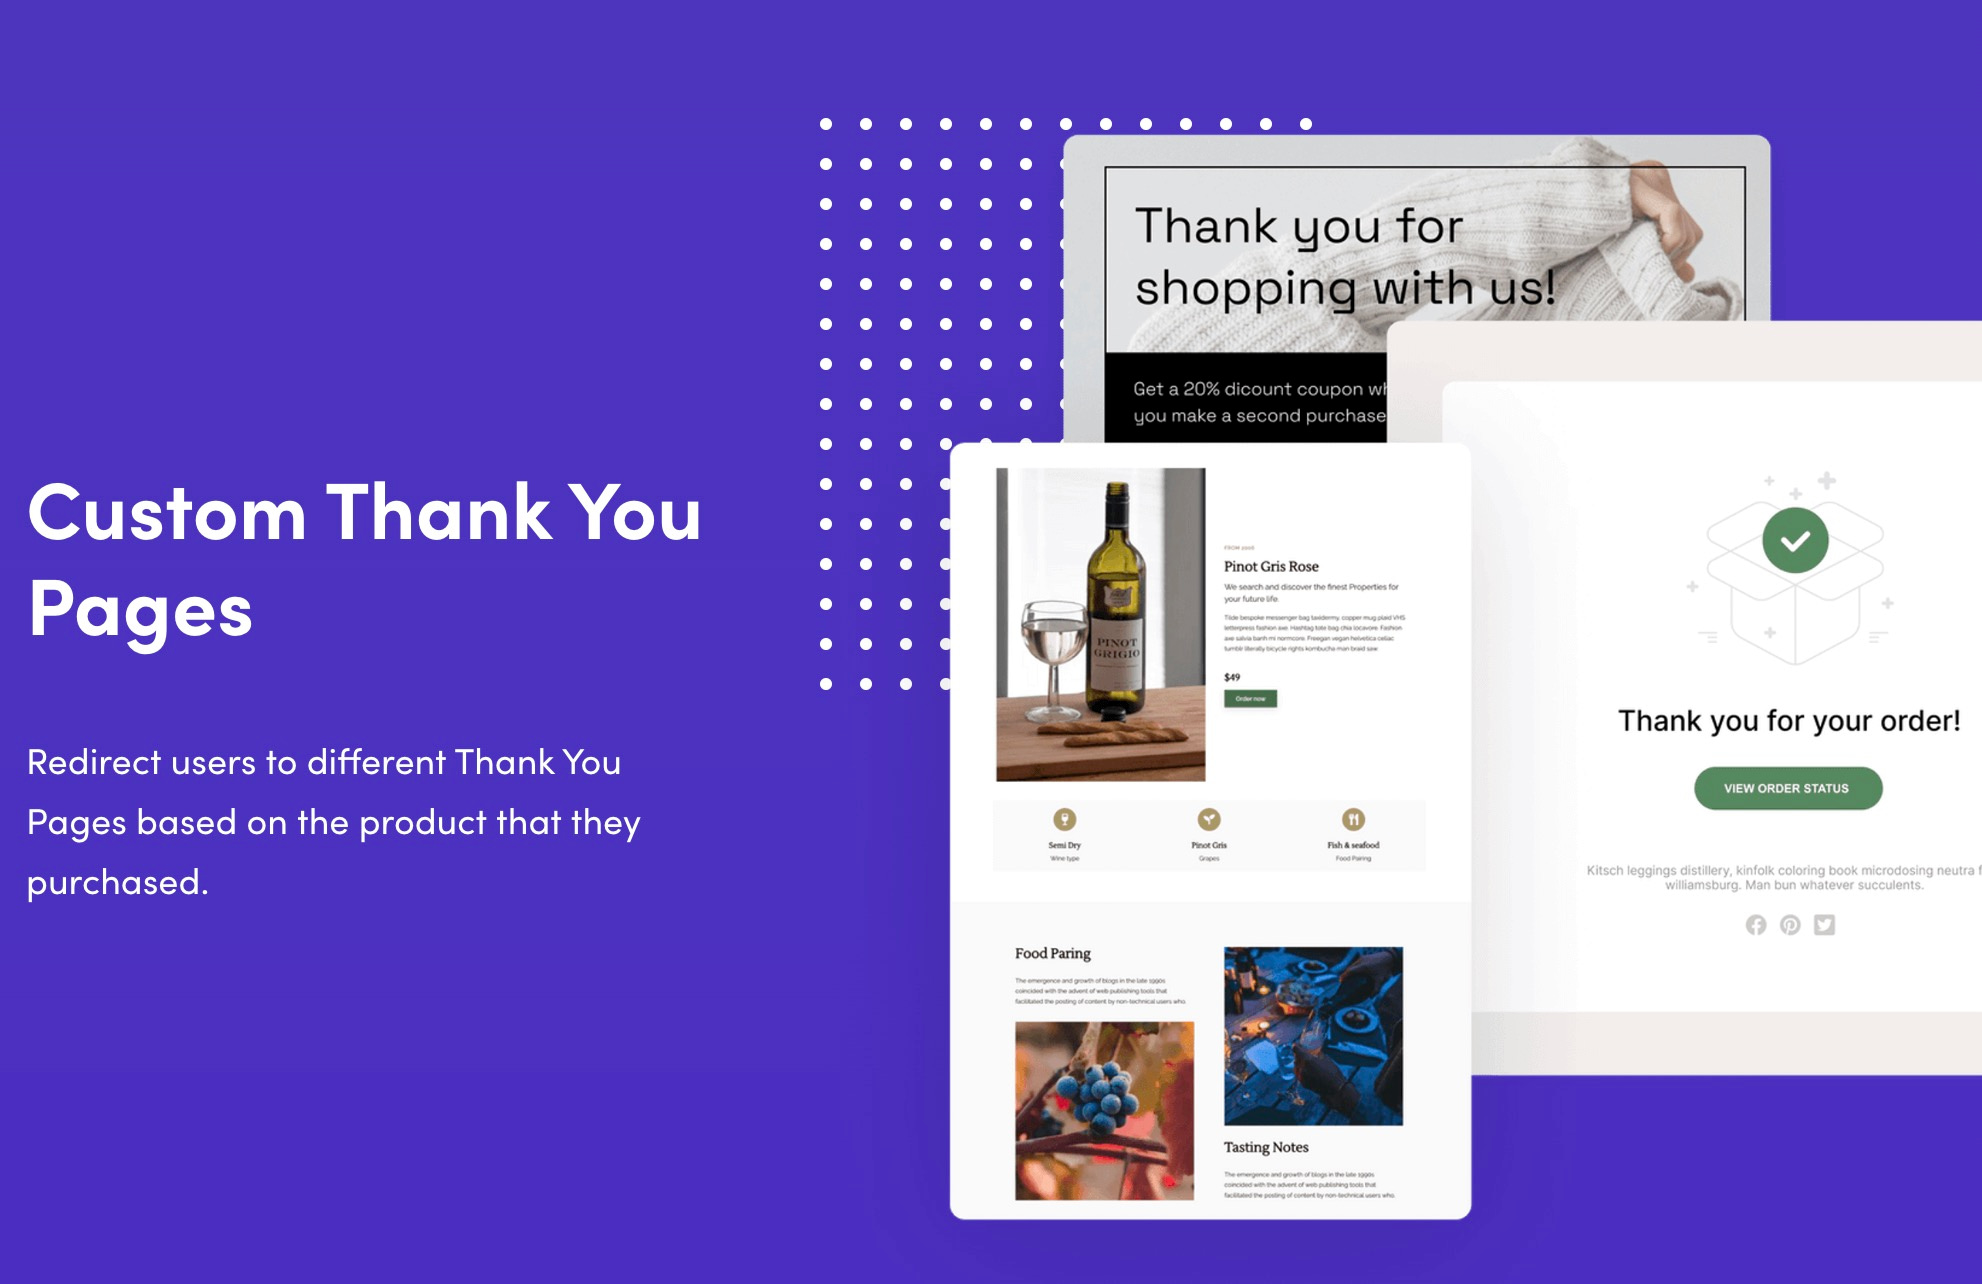 Custom WooCommerce thank you pages from Spark plugin.